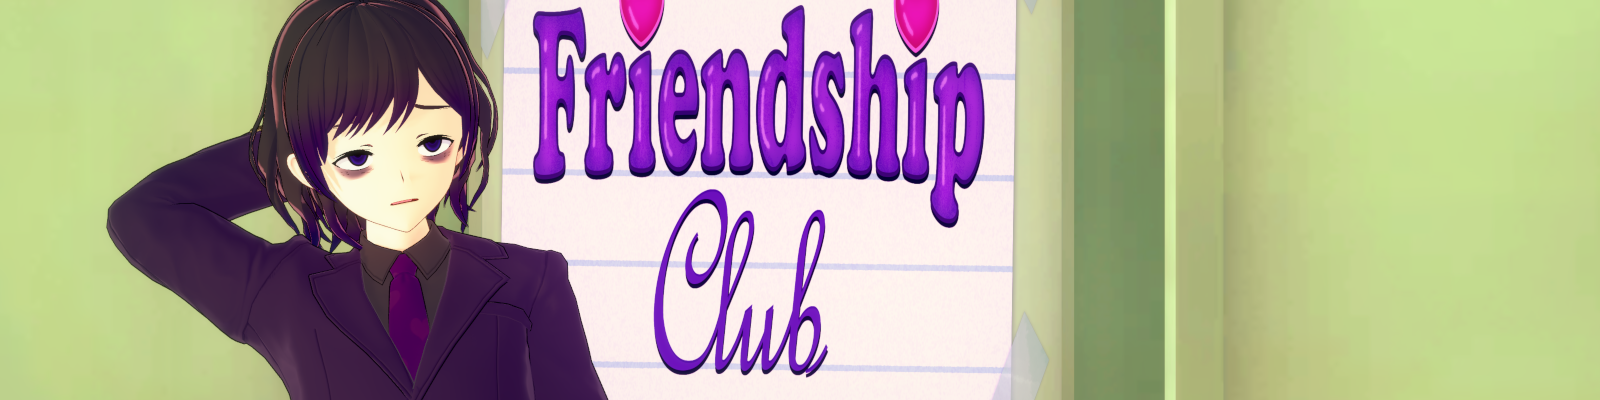 Welcome to The Friendship Club!